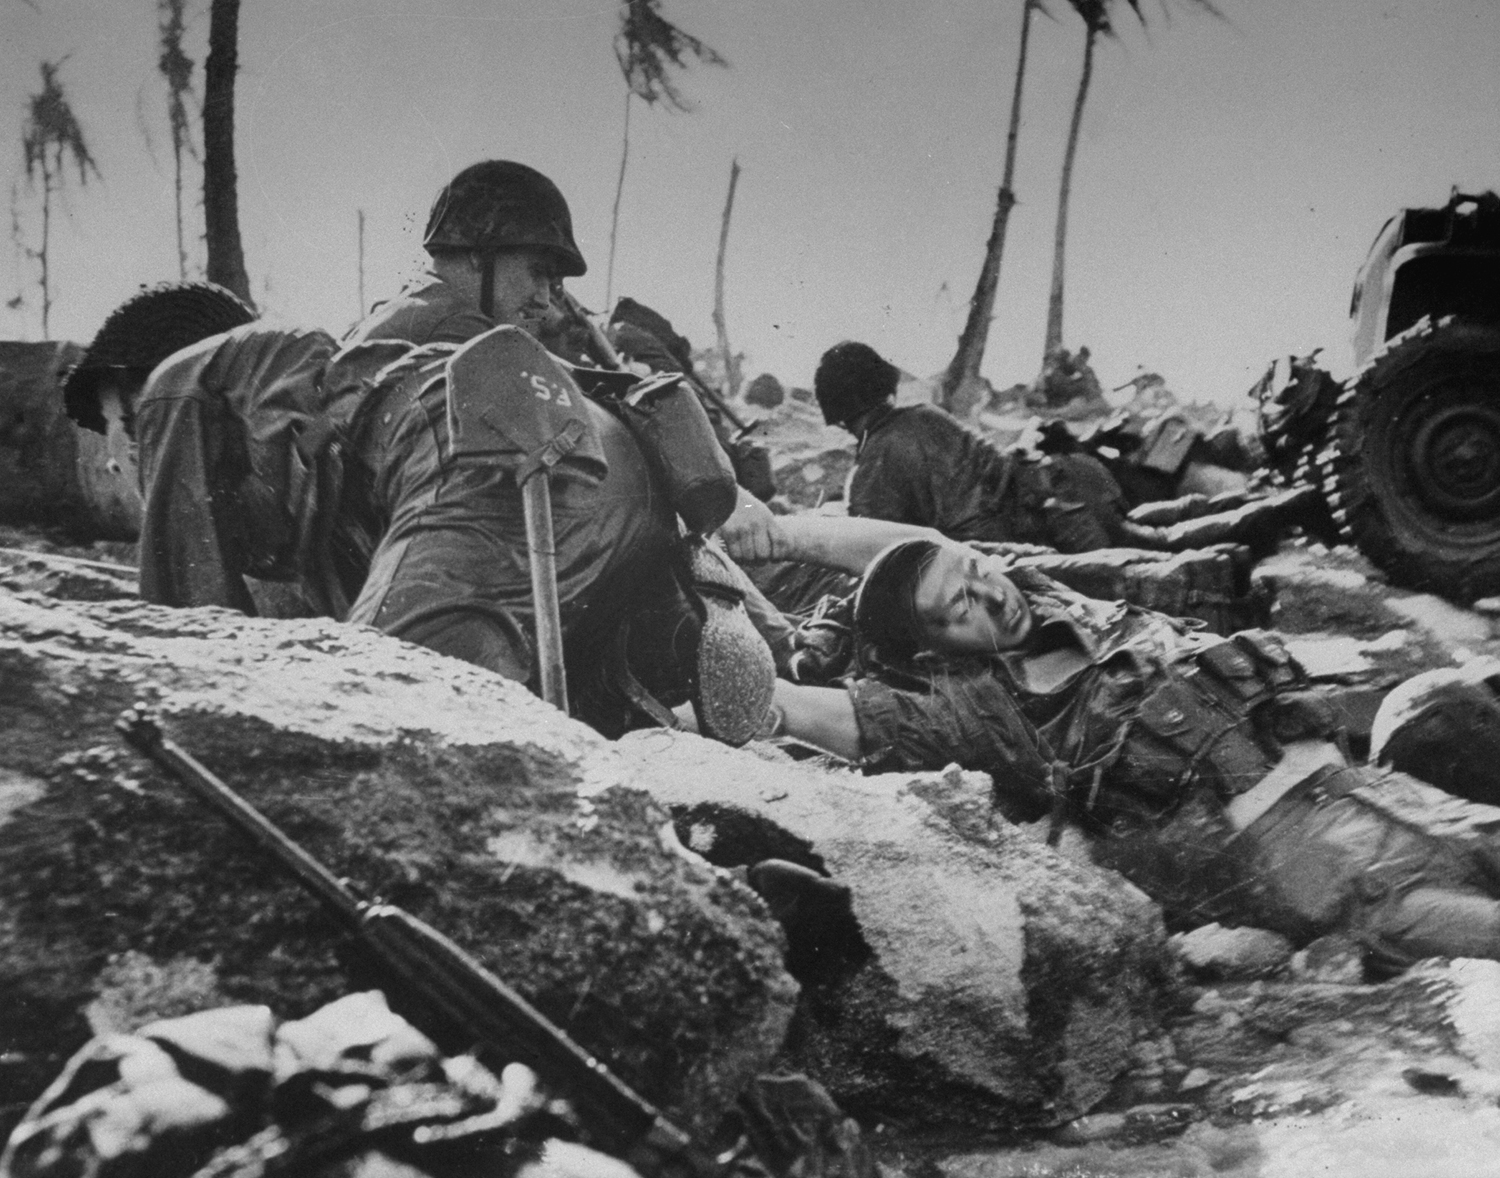 On the coral beach of Eniwetok's Engebi Island, a Marine drags a dead comrade out of the surf.